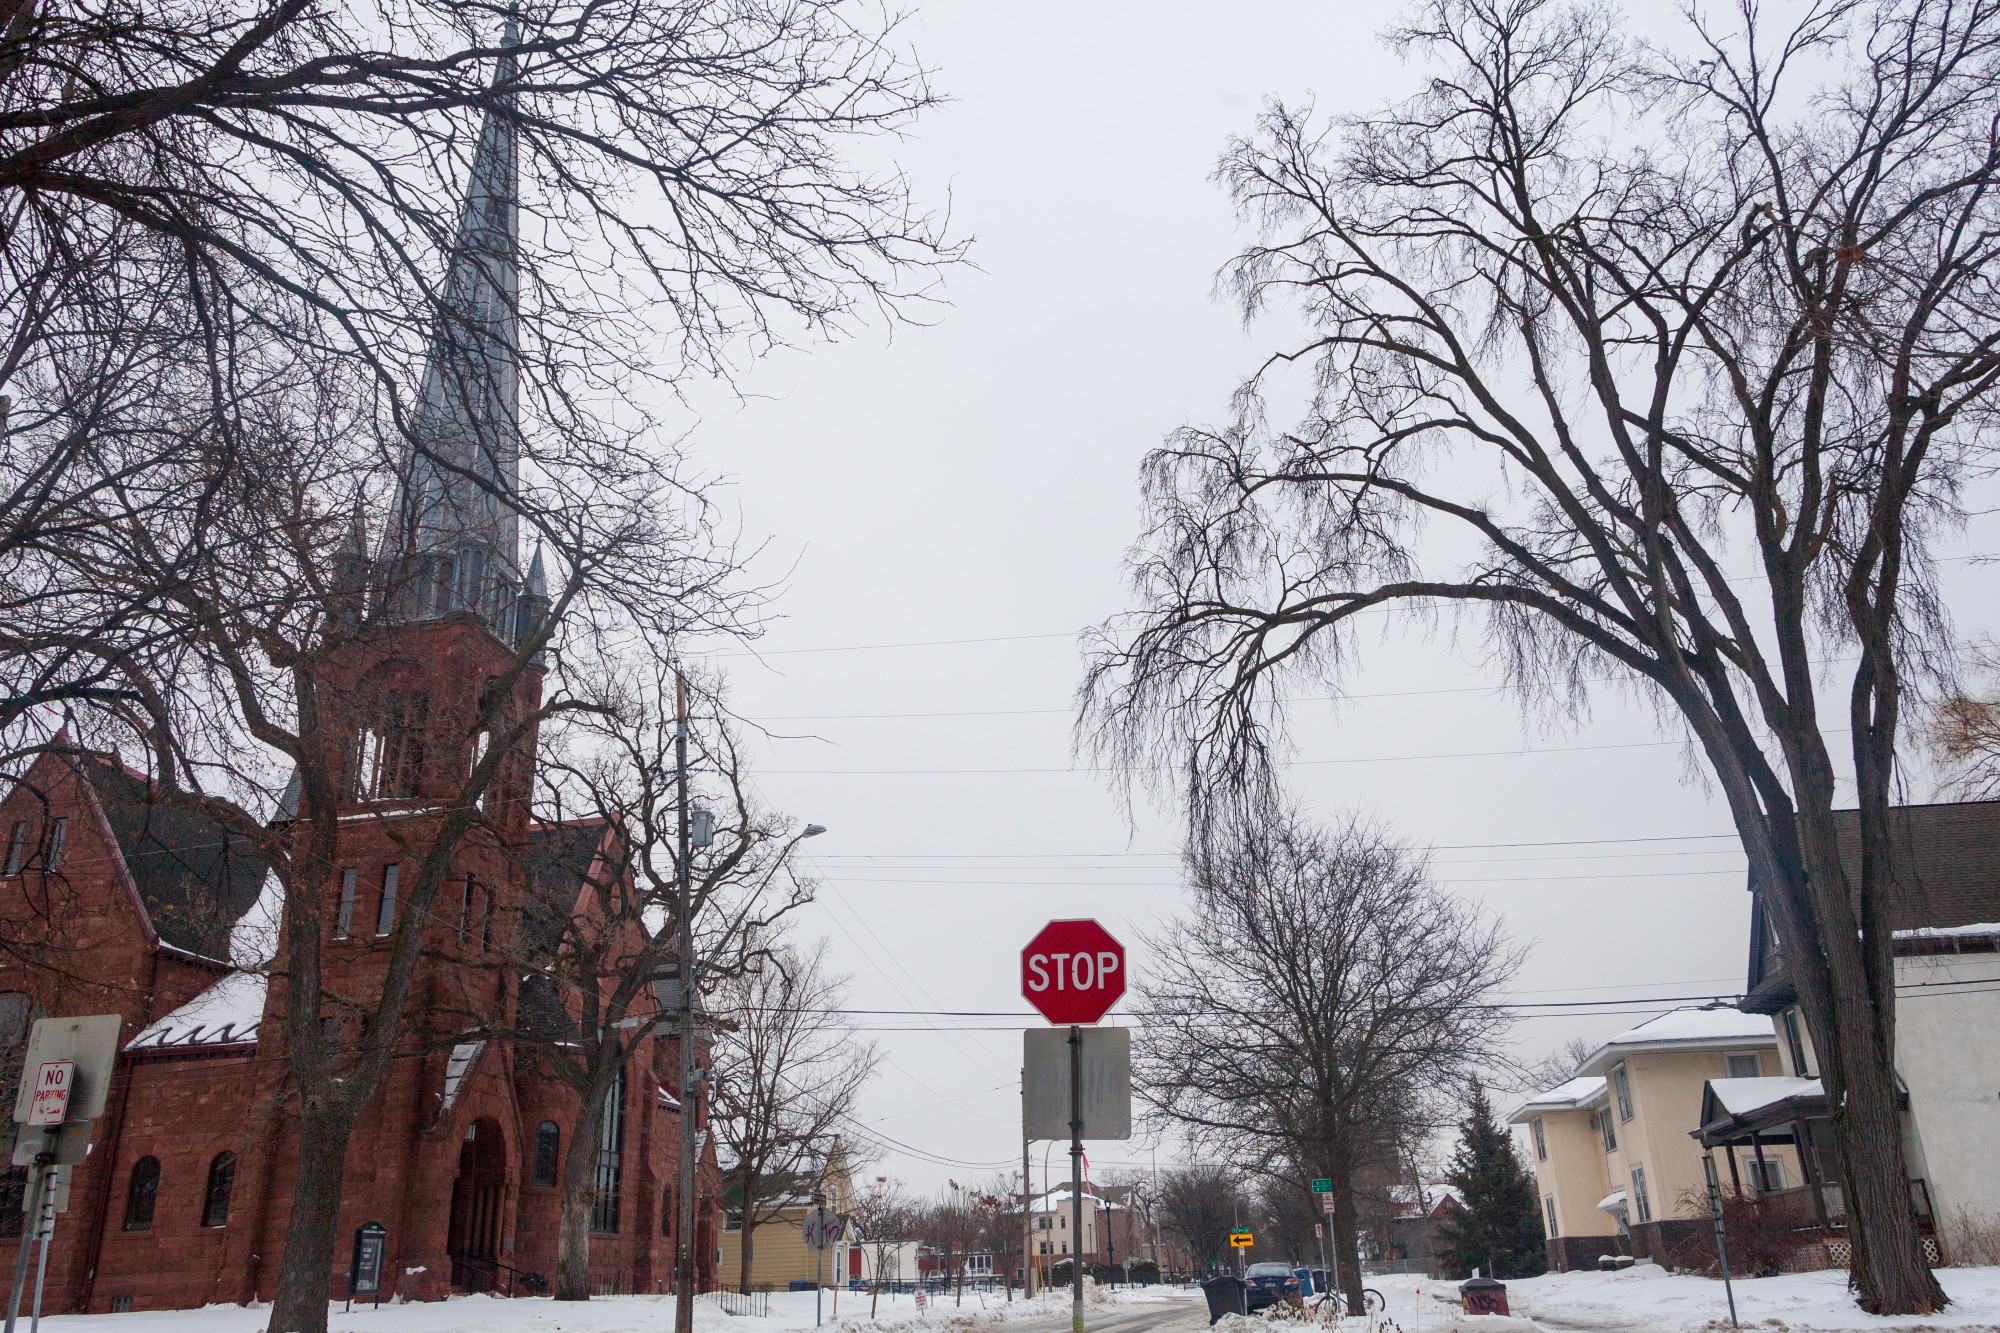 The First Congregational Church is nestled between single family residences in the Marcy Holmes neighborhood on Tuesday, Jan. 28.  The neighborhood provides housing for a significant number of University students.